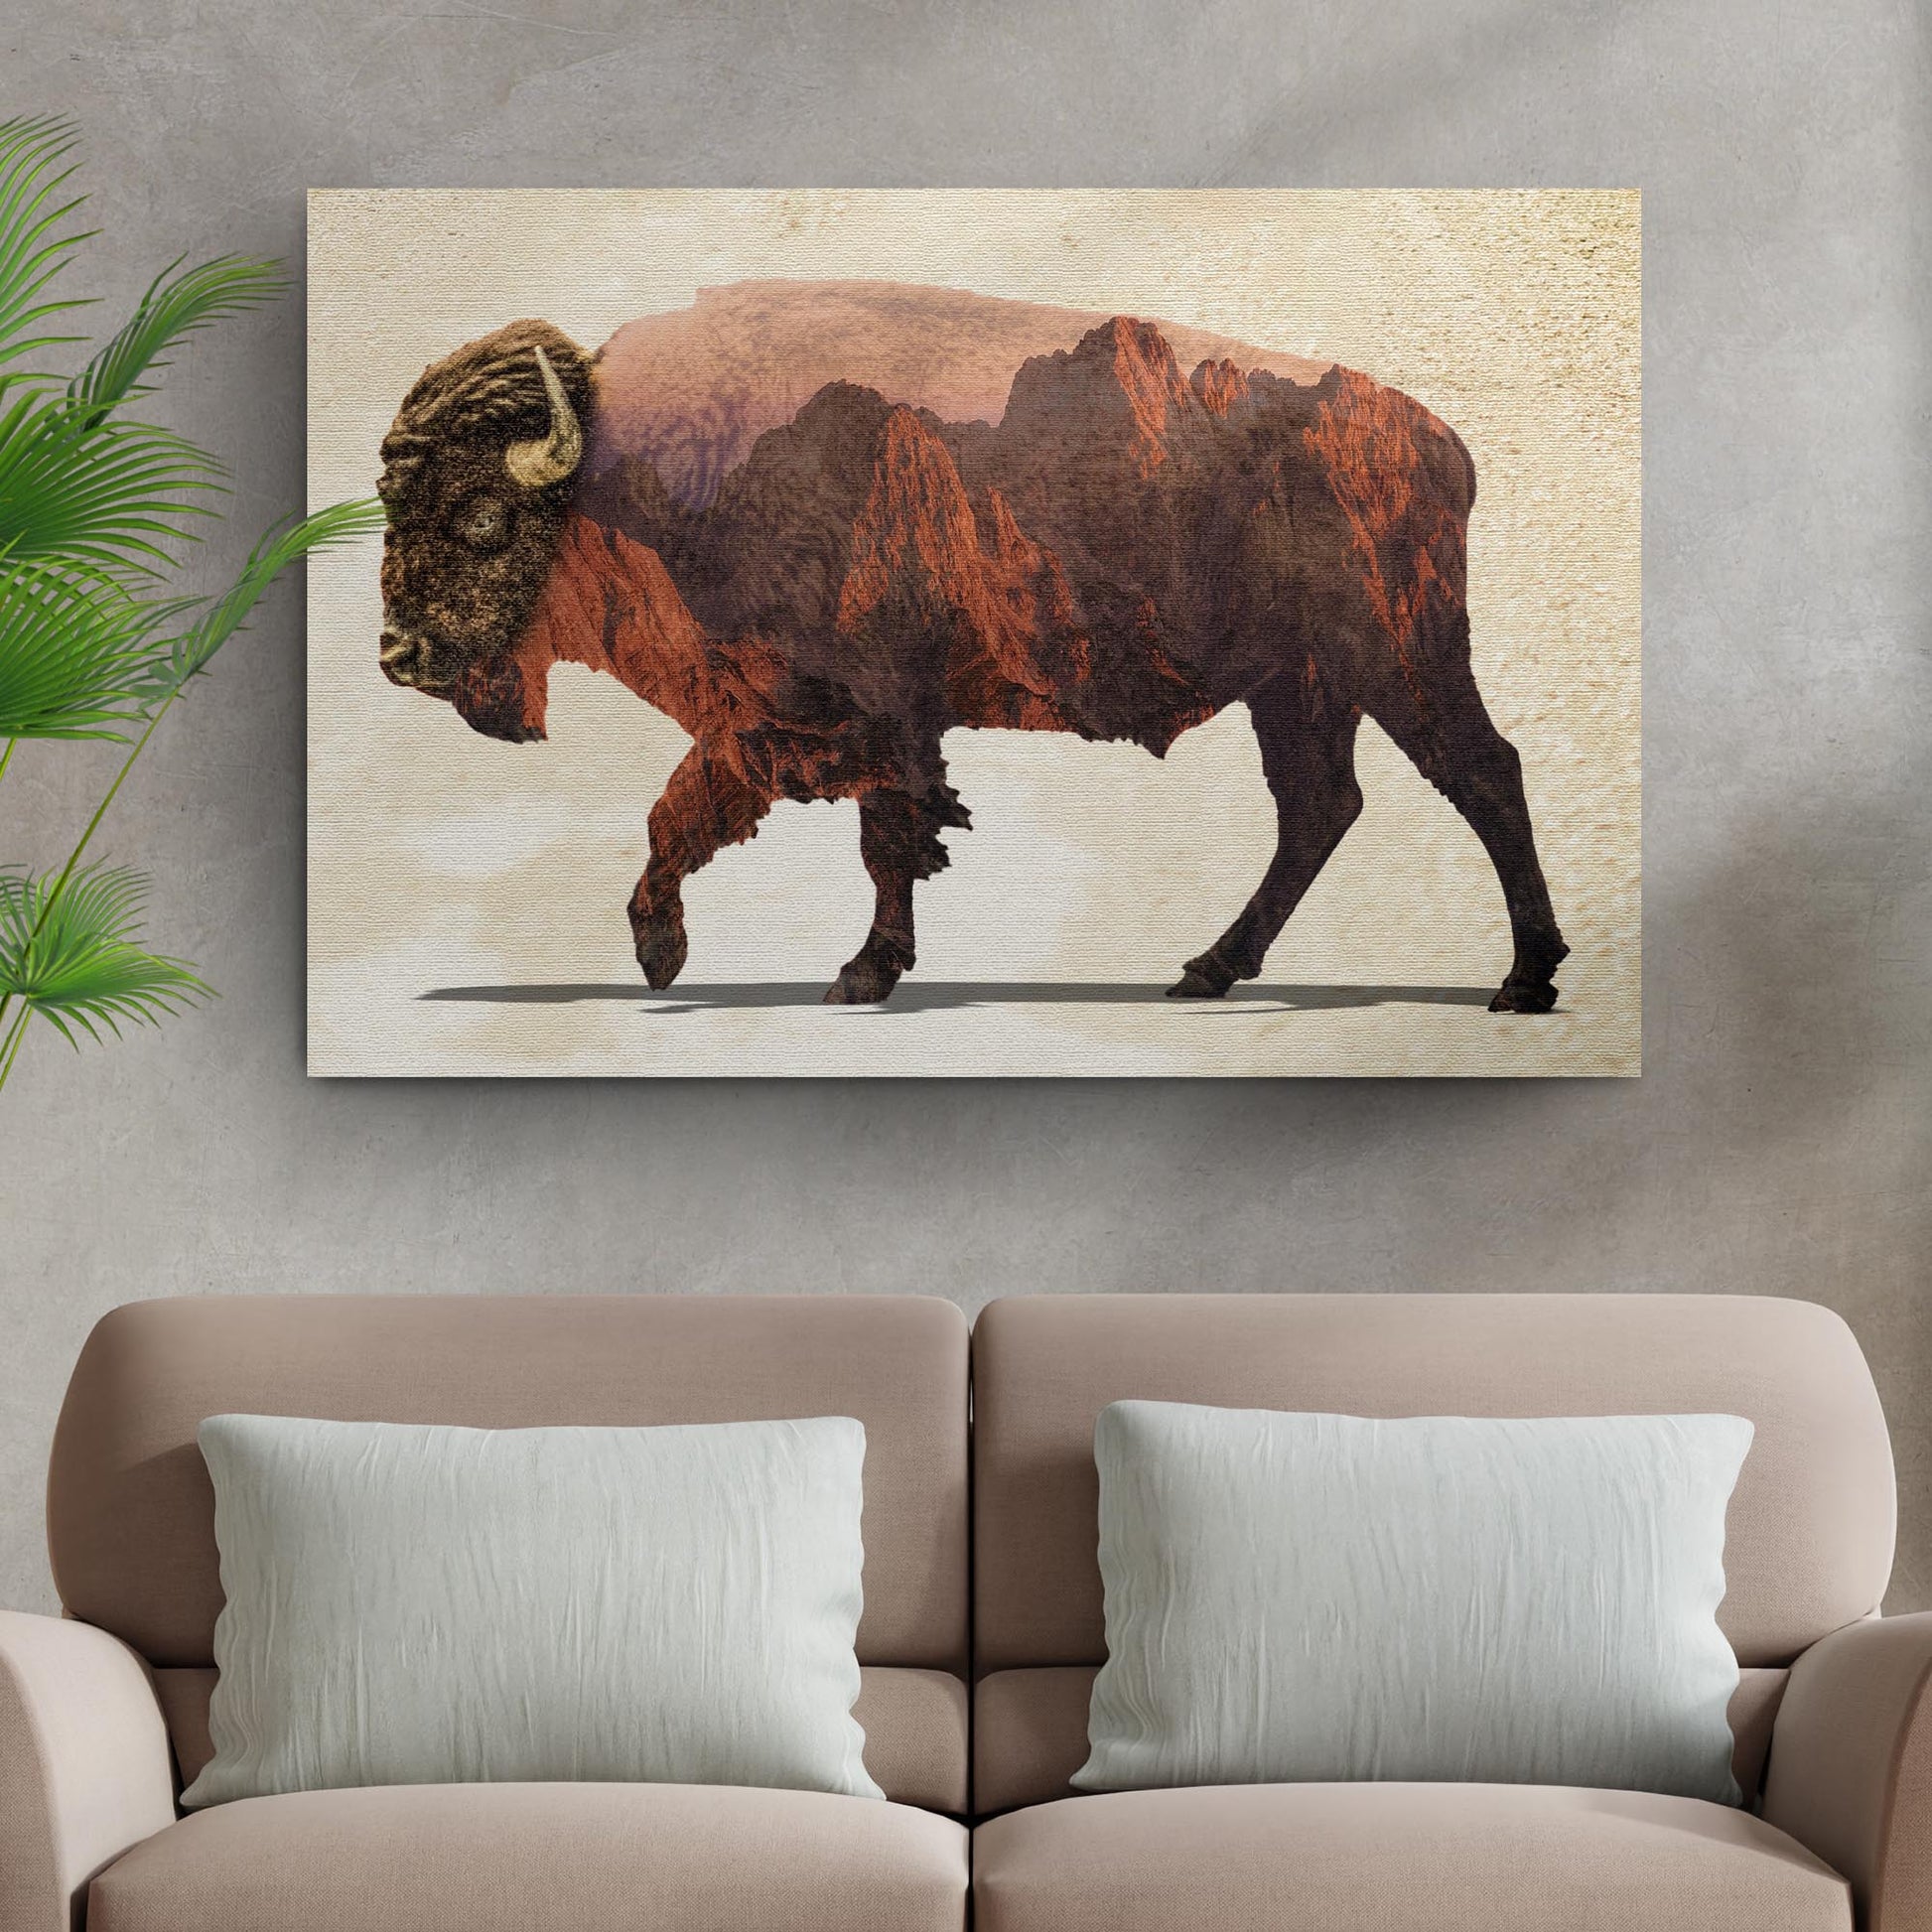 Double Exposure Buffalo with Mountains Canvas Wall Art - Image by Tailored Canvases